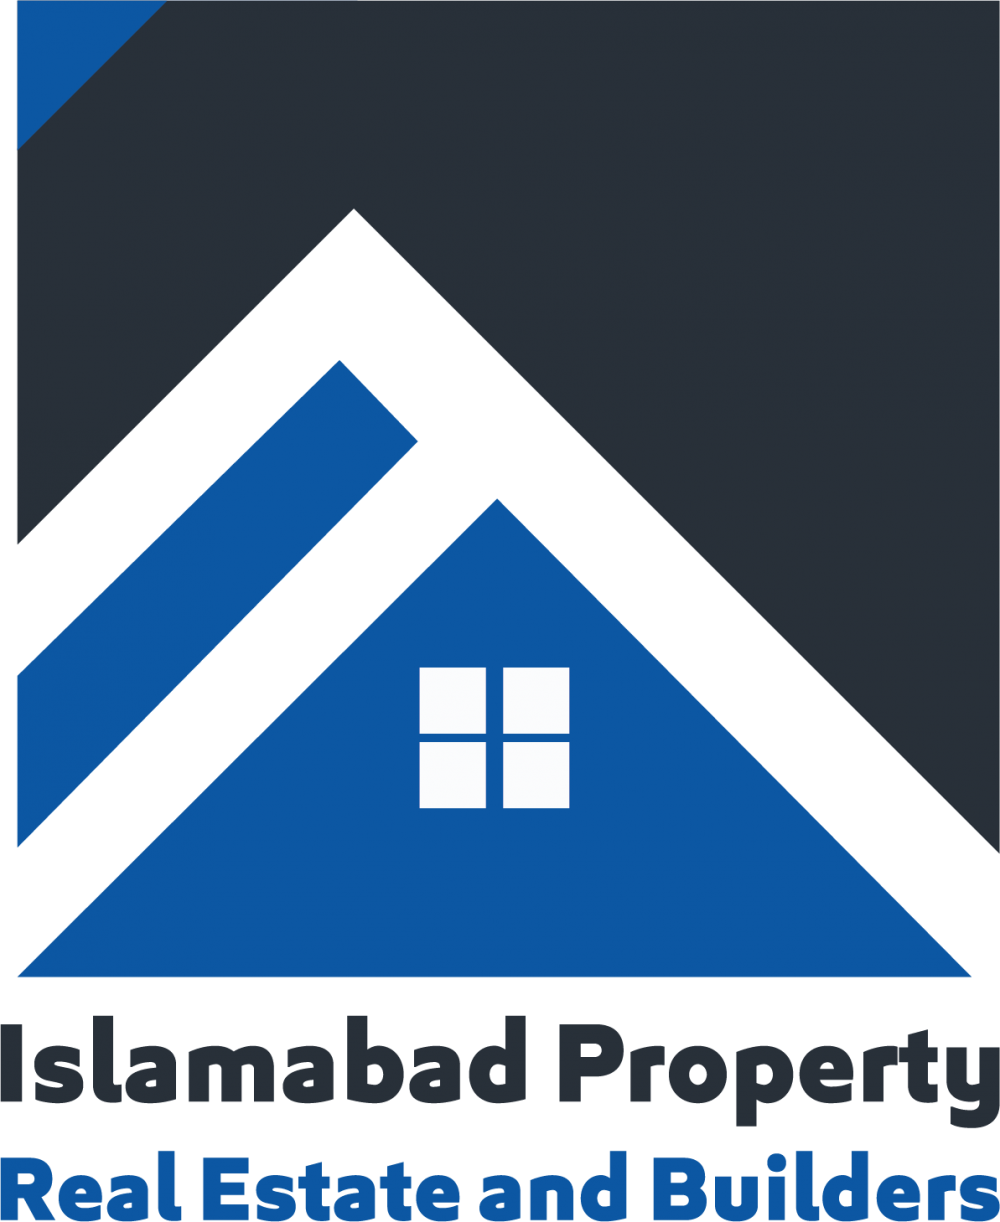 Logo Realestate Agency Islamabad Property Real Estate and Builders 